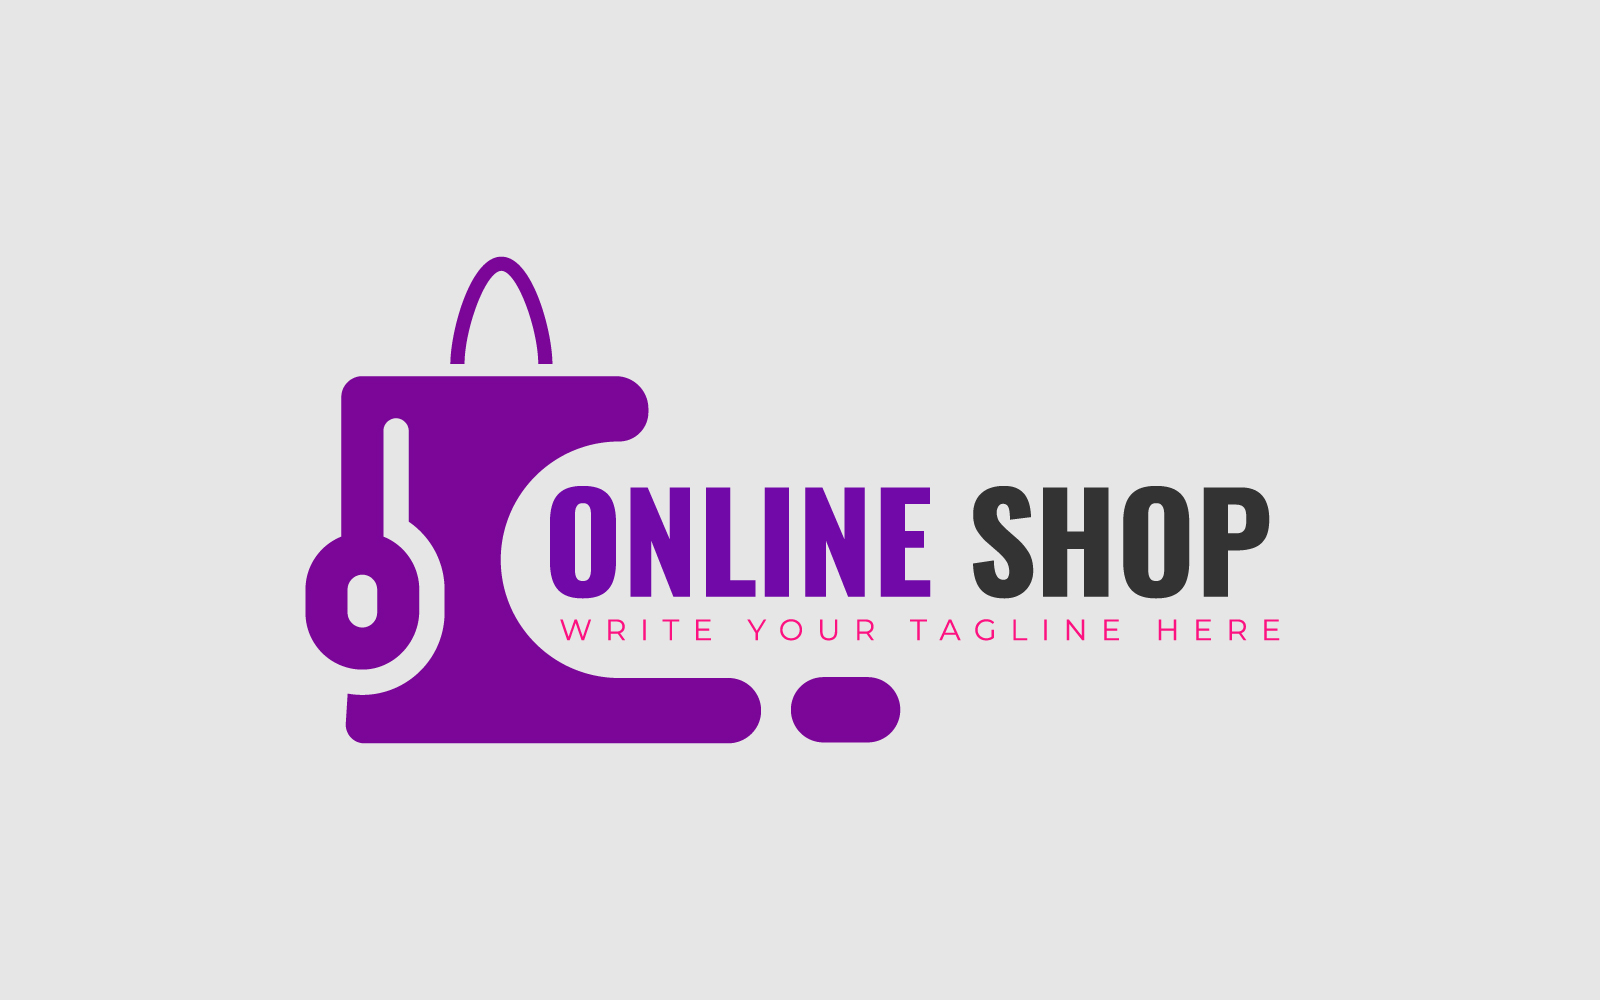 Online Shopping Logo Design With Shopping Bag And Mouse For E-Commerce Web Or Business.